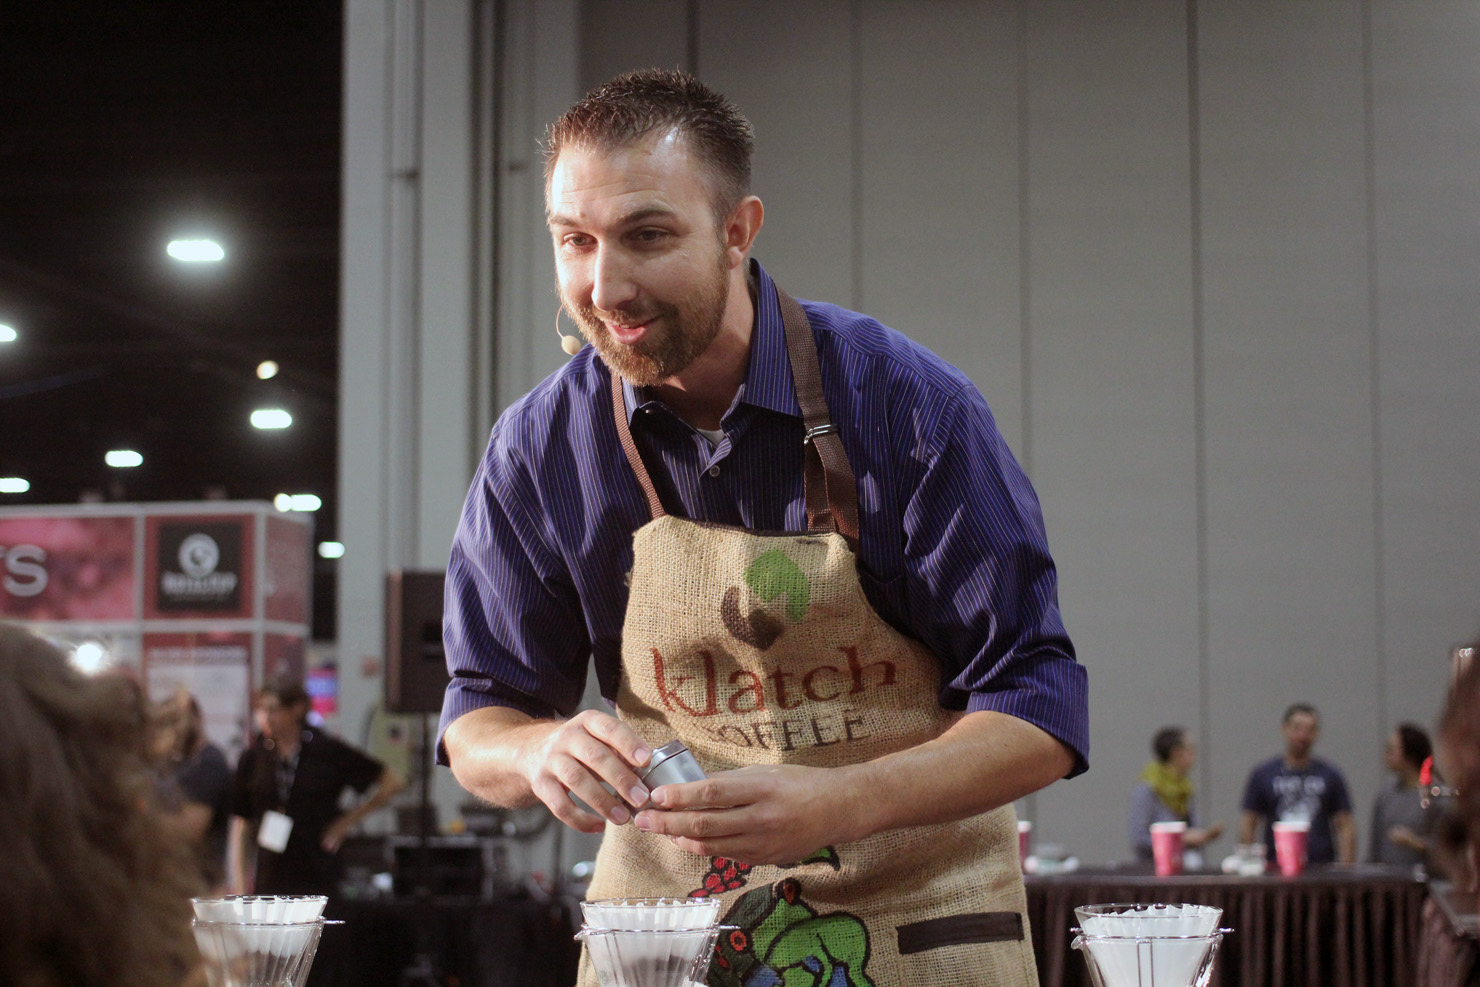 world us brewers cup championship champion barista competition klatch coffee los angeles todd goldsworthy interview sprudge